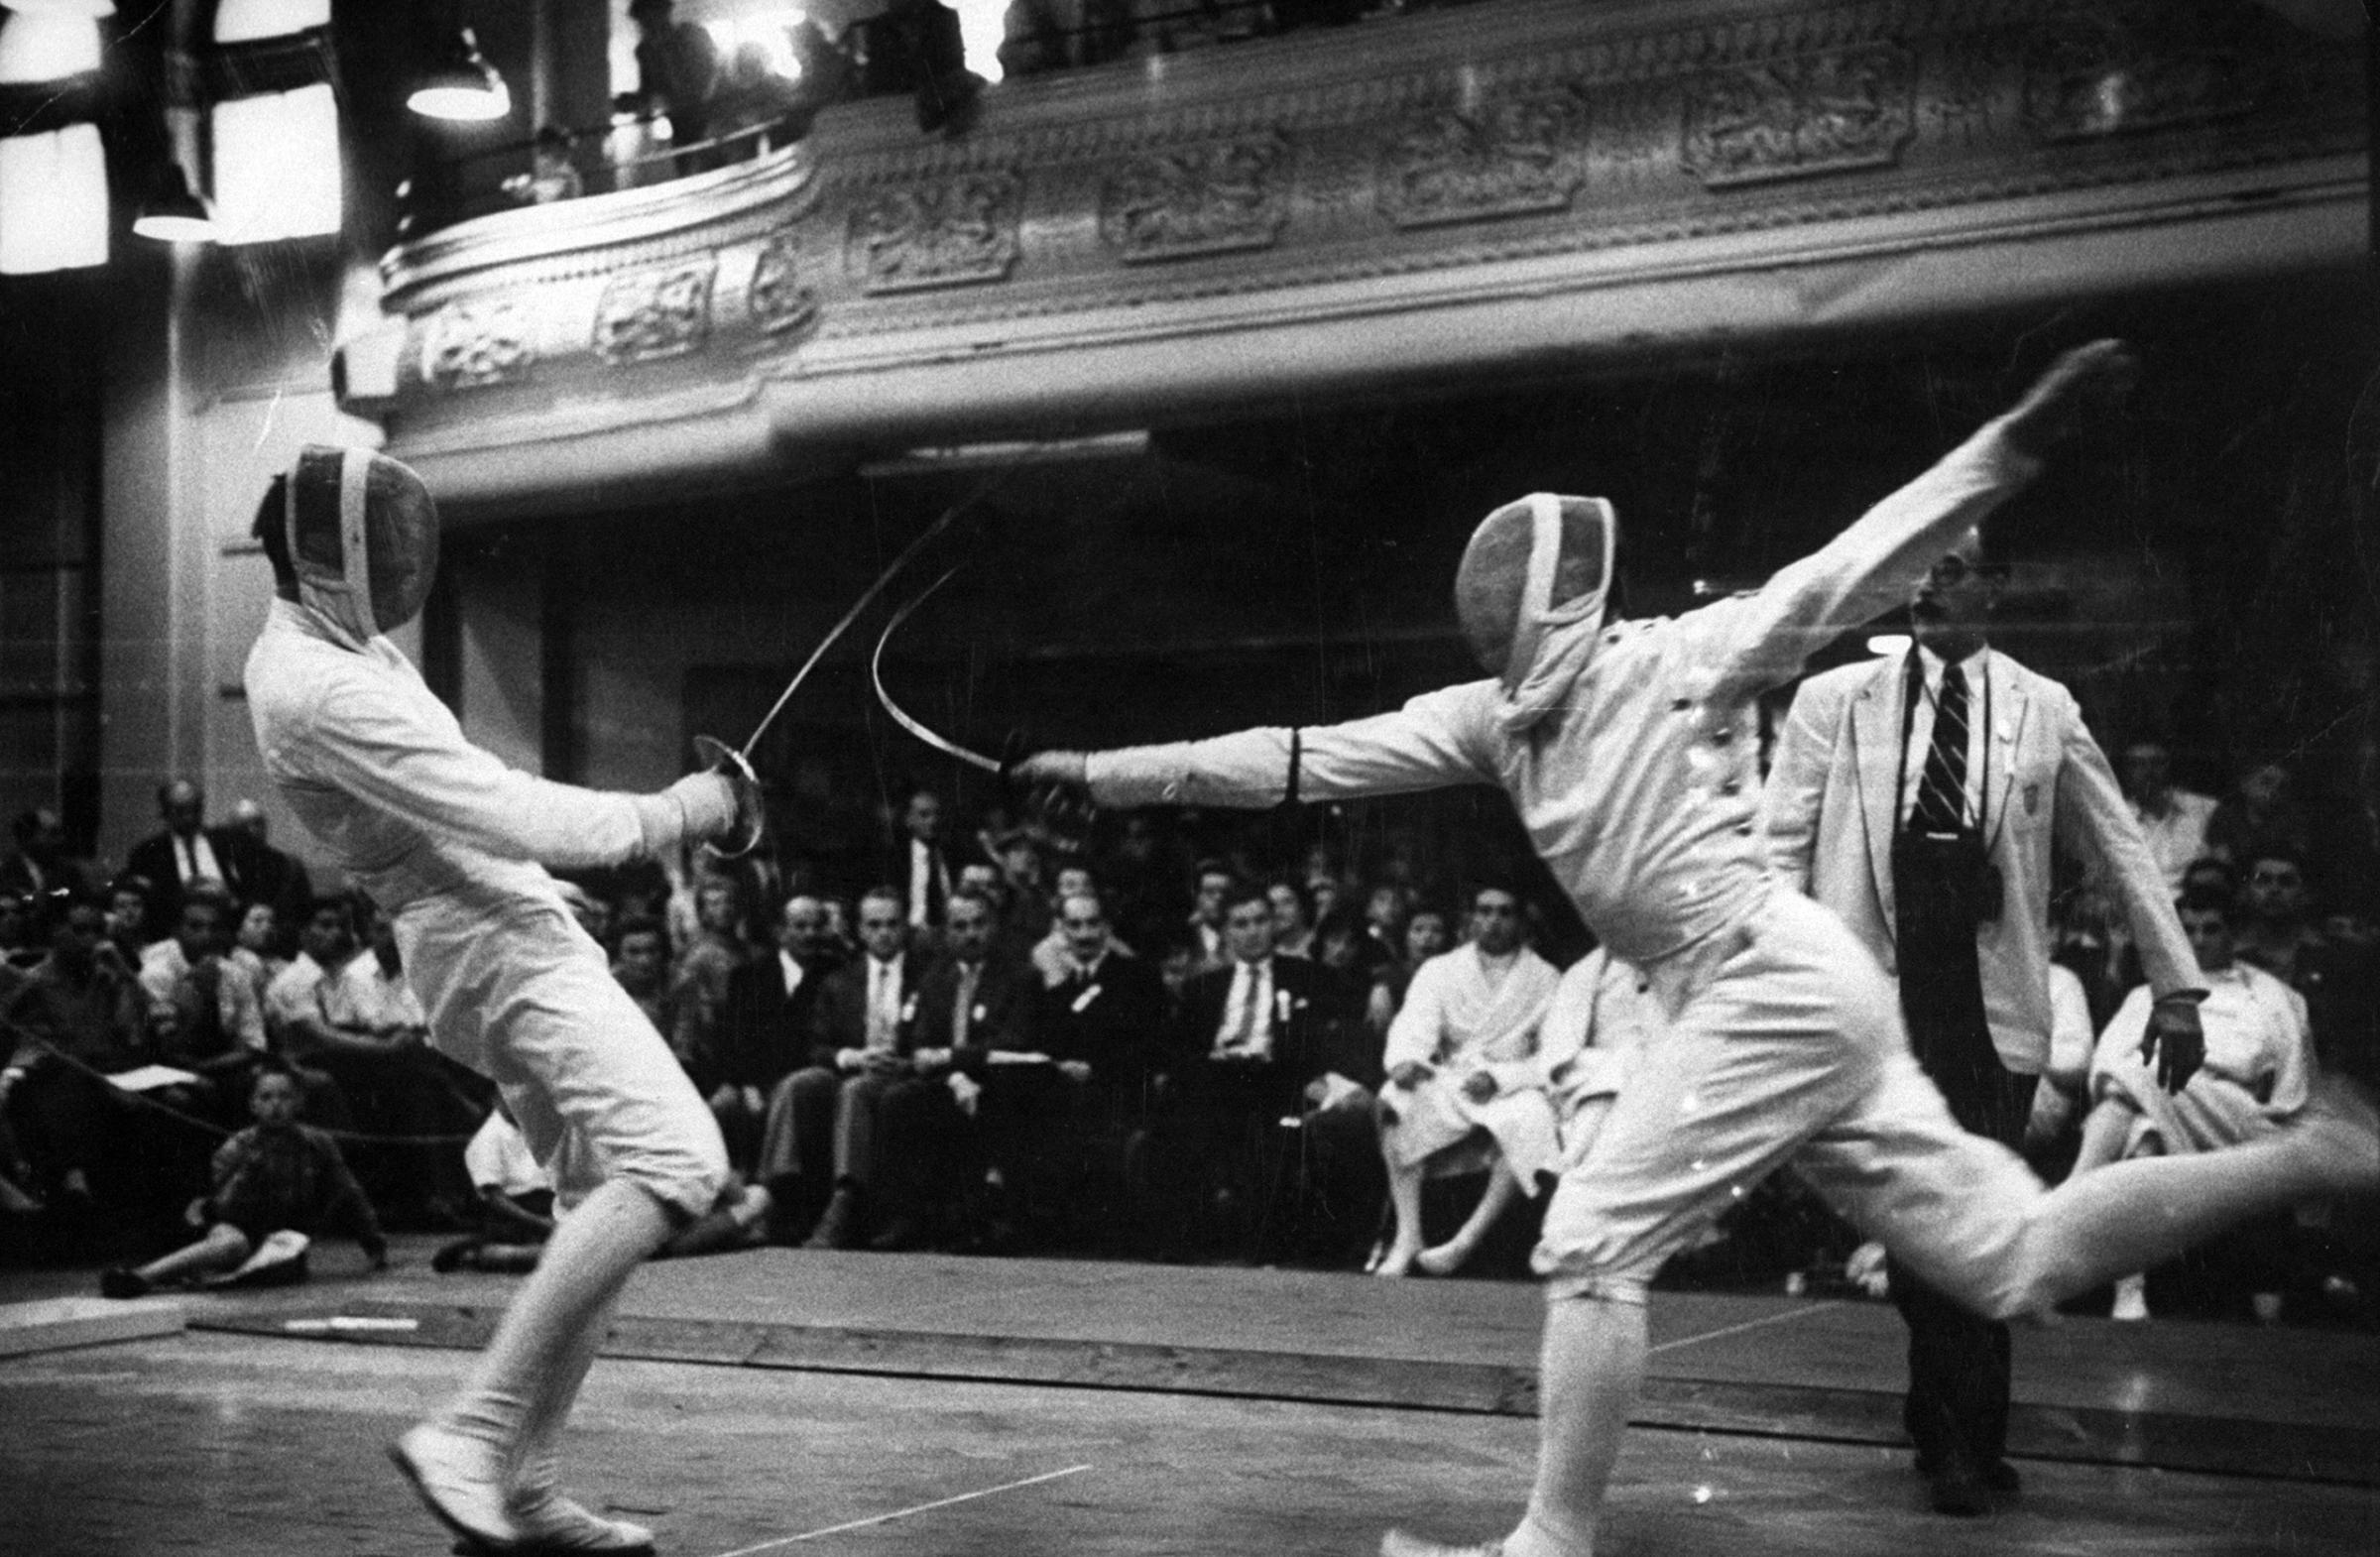 Fencers competing in the 1956 summer Olympics in Melbourne, Australia.